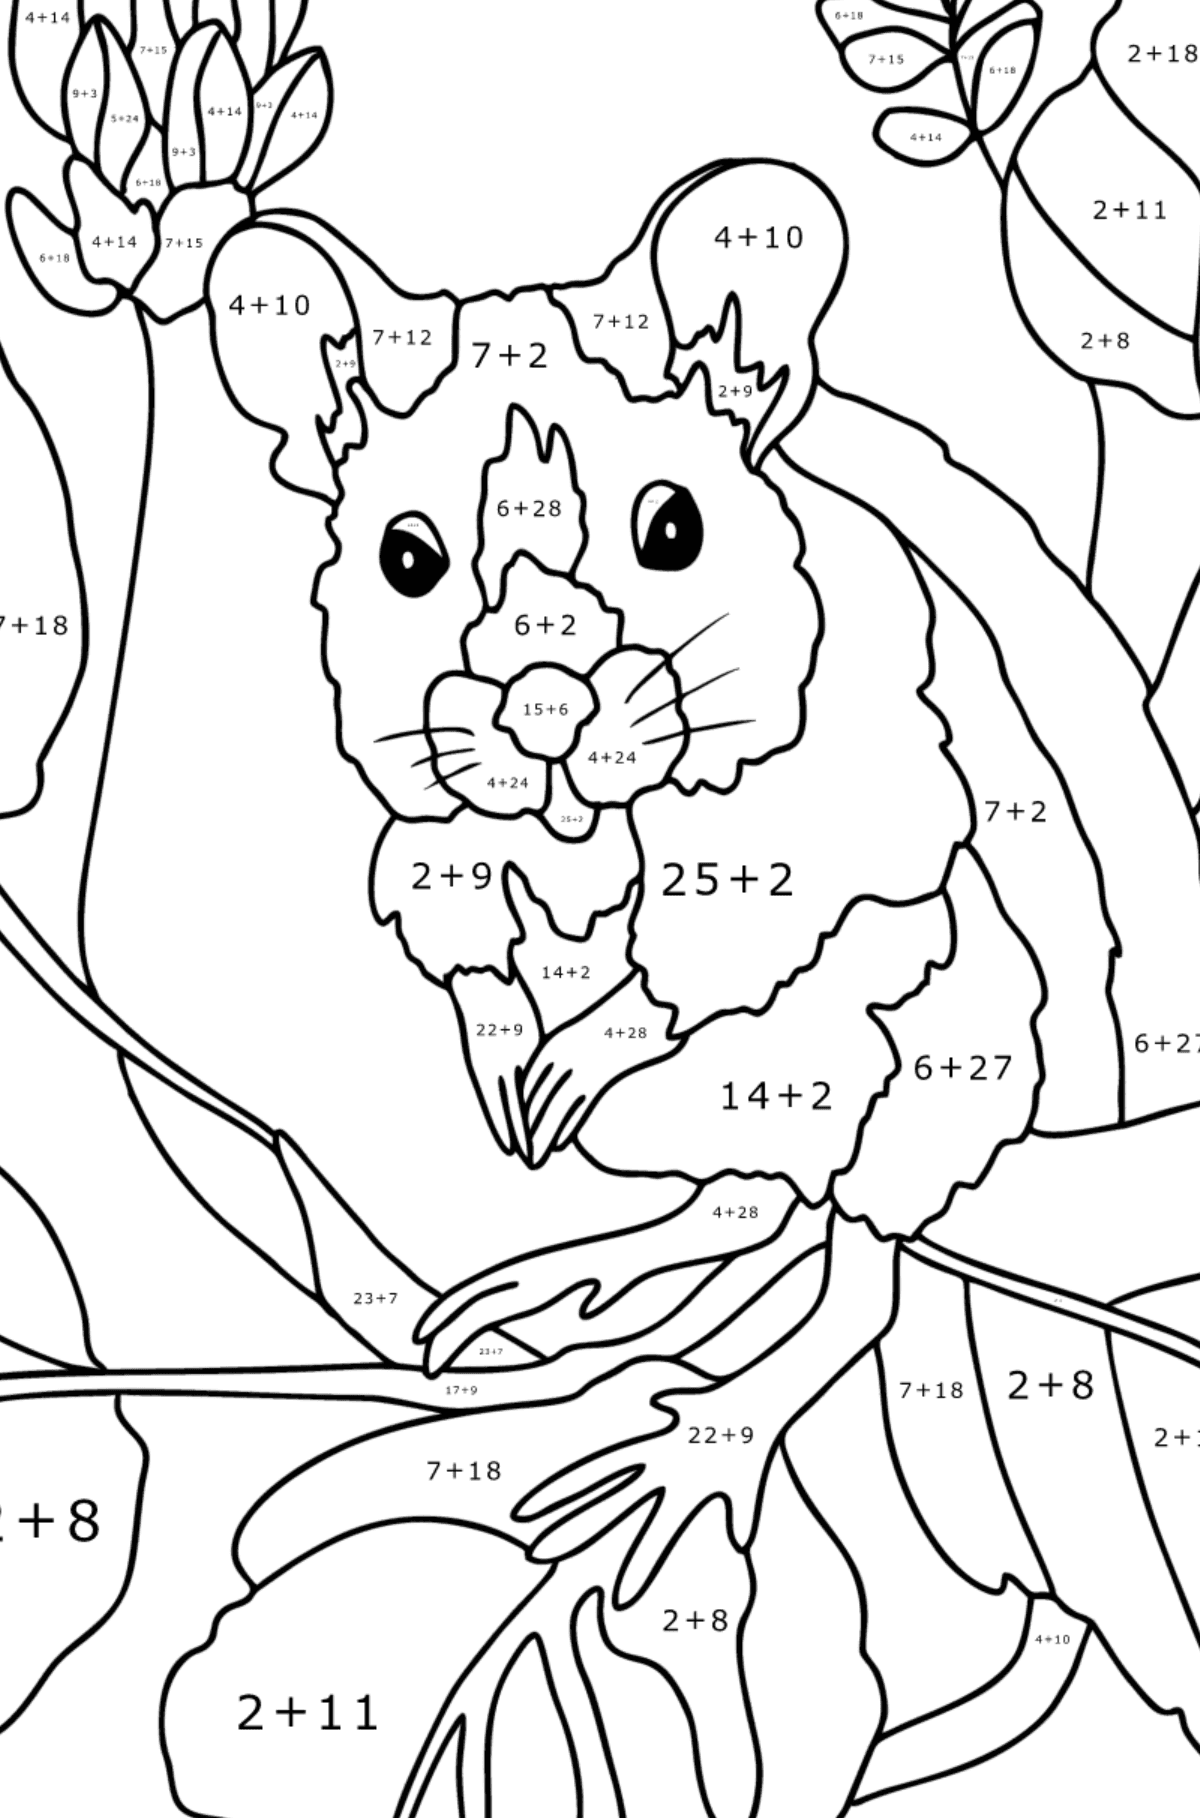 Frightened mouse - Mice coloring pages for Adults online